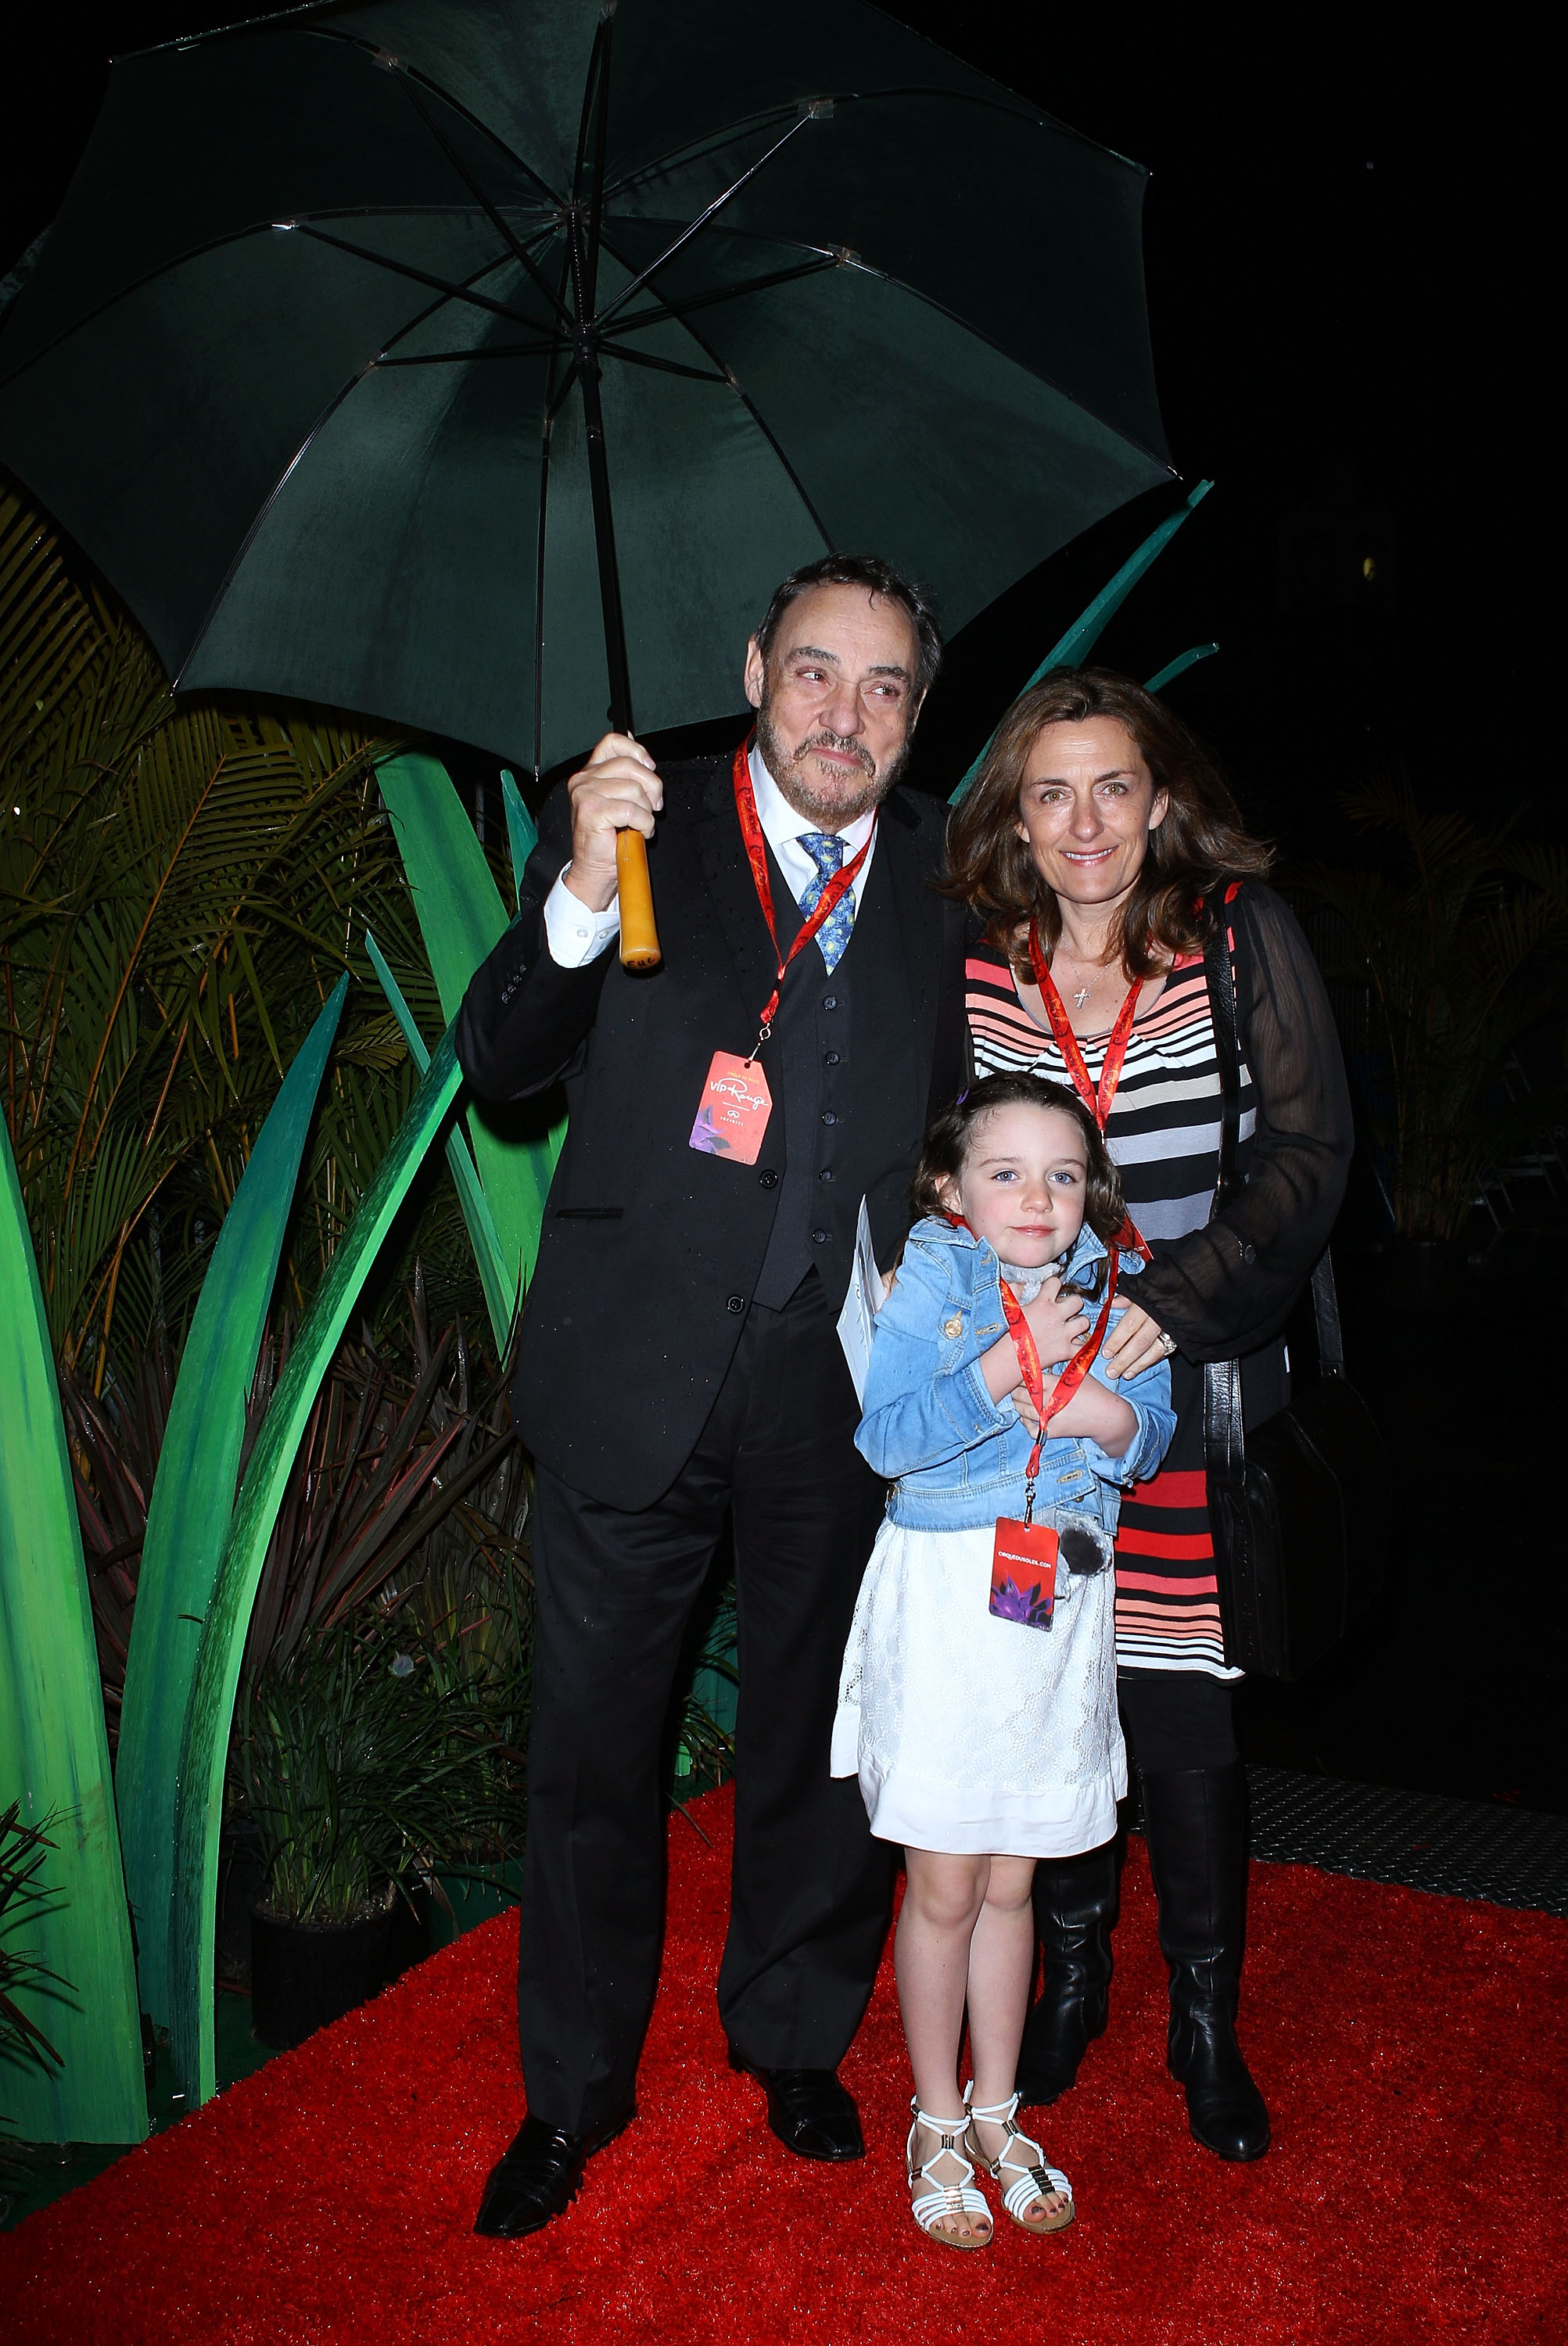 John Rhys-Davies, his wife Lisa Manning, and their daughter Mia on September 13, 2012 in Sydney, Australia. | Source: Getty Images